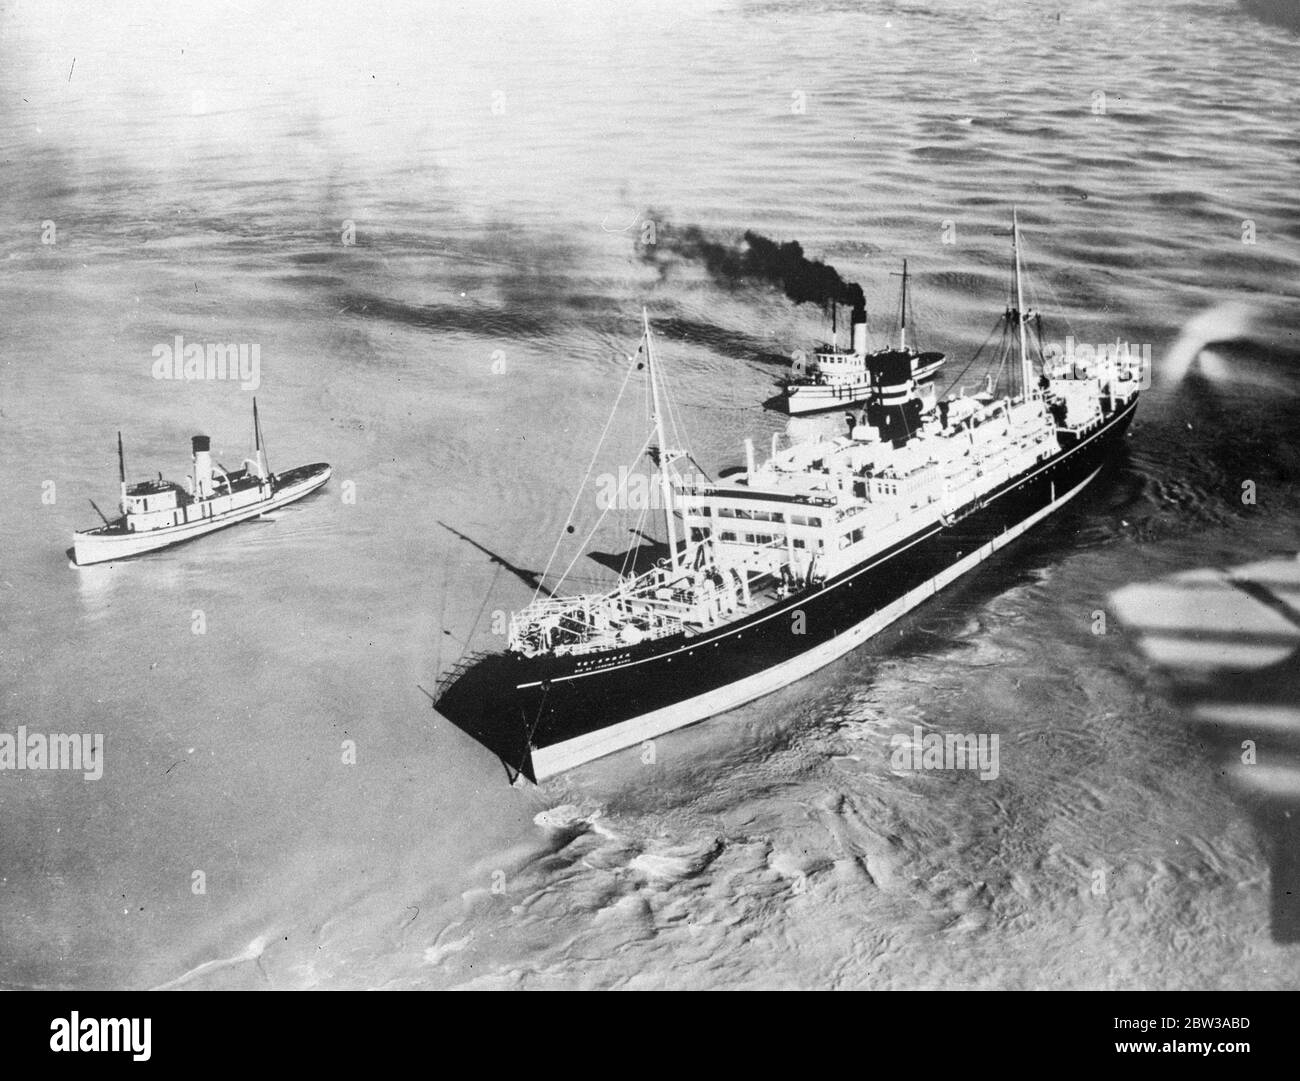 Japanese motorship aground at New Orleans . The Japanese motor ship Rio de Janeiro Maru , grounded at the mouth of the Mississippi River at New Orleans with 60 passengers on board and carrying a cargo of coffee , bound for New Orleans from Brazil . The passengers were taken off safely . Photo shows the Japanese motorship Rio de Janeiro Maru , aground off New Orleans . 26 April 1934 Stock Photo